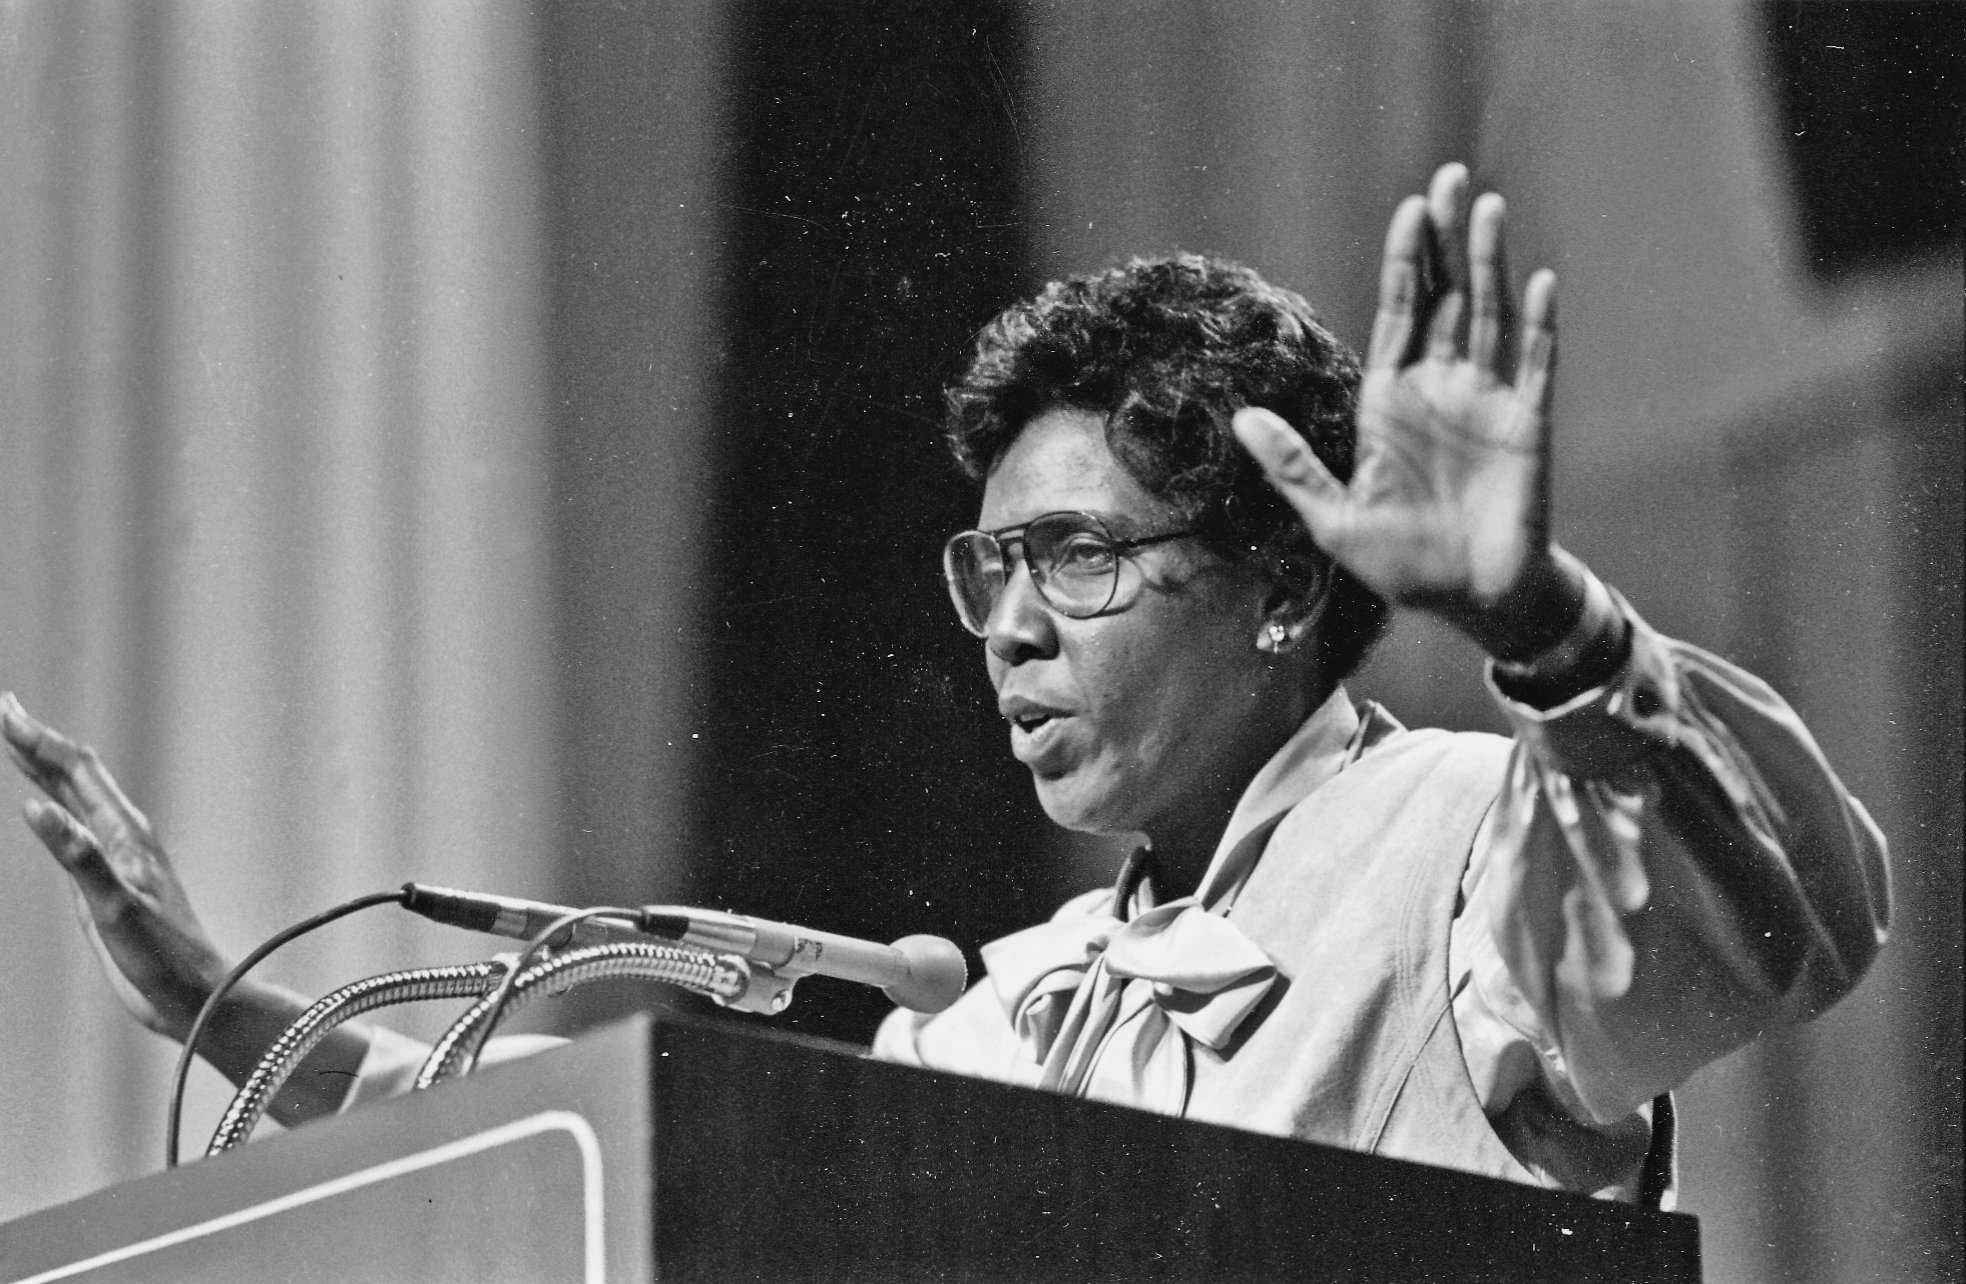 U.S congresswoman Barbara Jordan electrified audiences with her distinct oratory style, a style she admitted was learned during her years on the Texas Southern University debate team under the leadership of Dr. Thomas Freeman.  